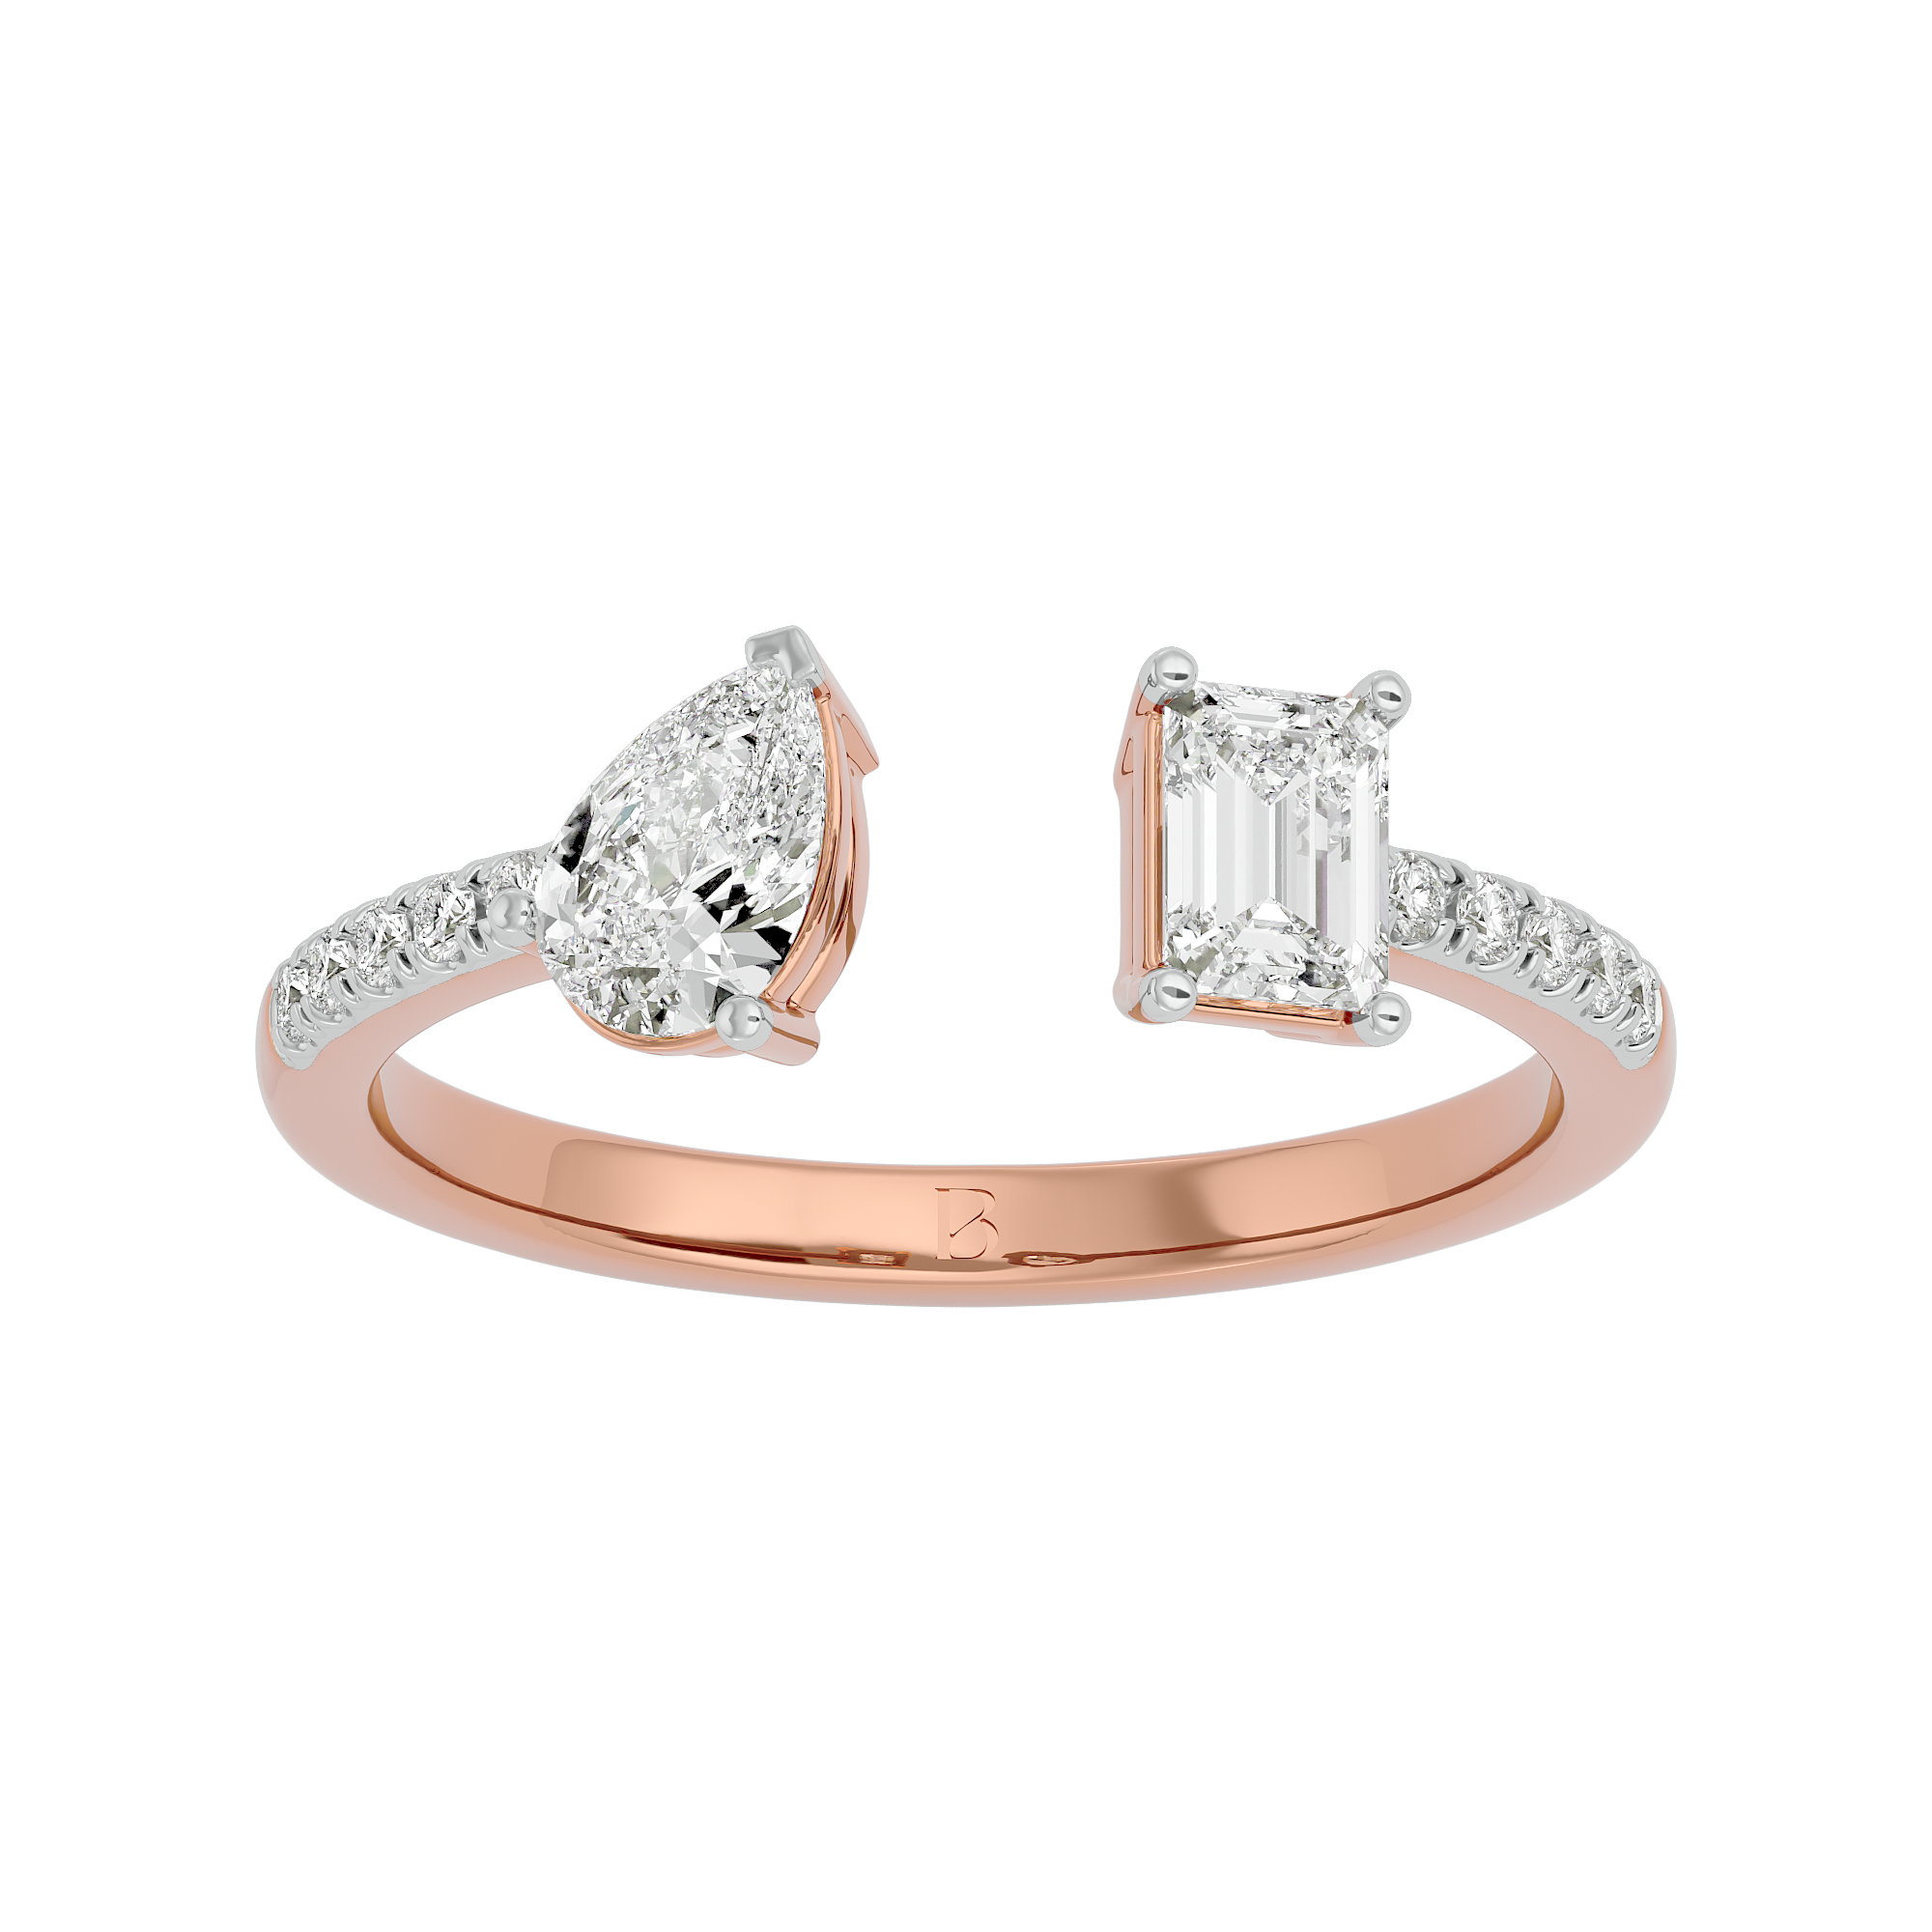 Solitaire Lab Grown Diamond Ring in Rose Gold 